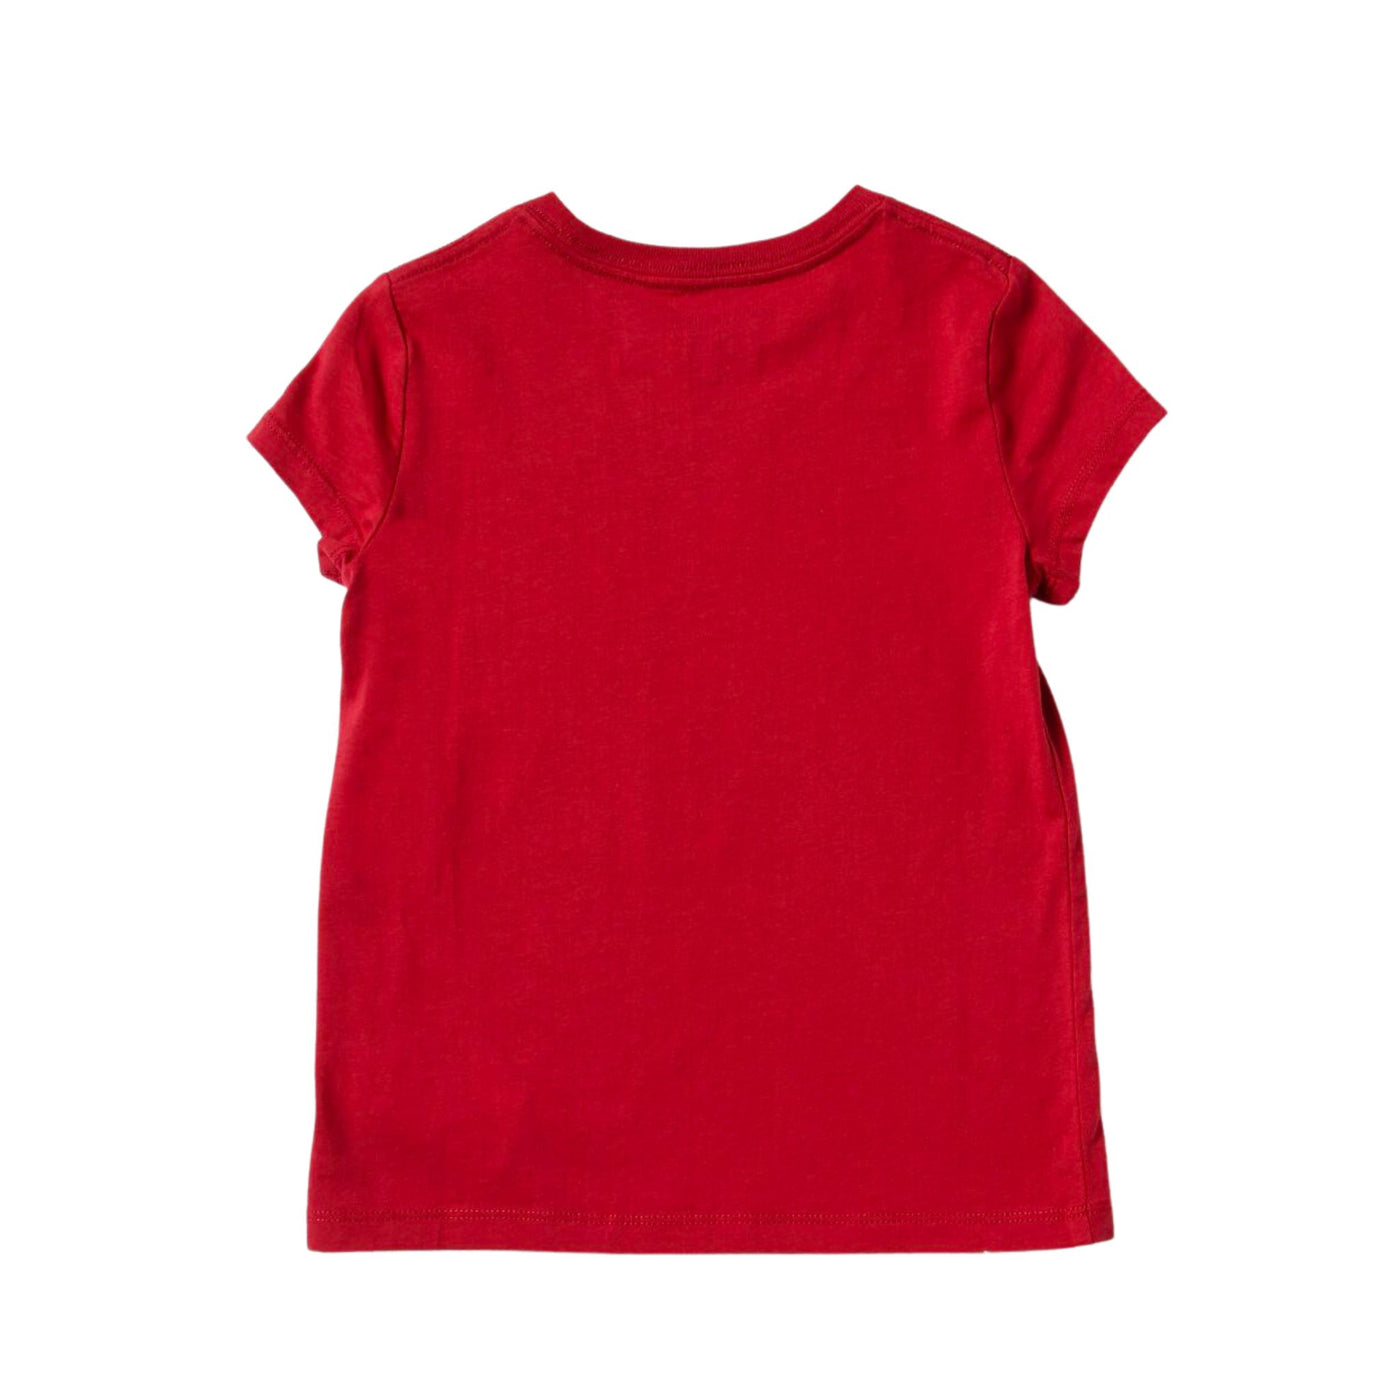 T-shirt for girls 2-4 years with Polo bear